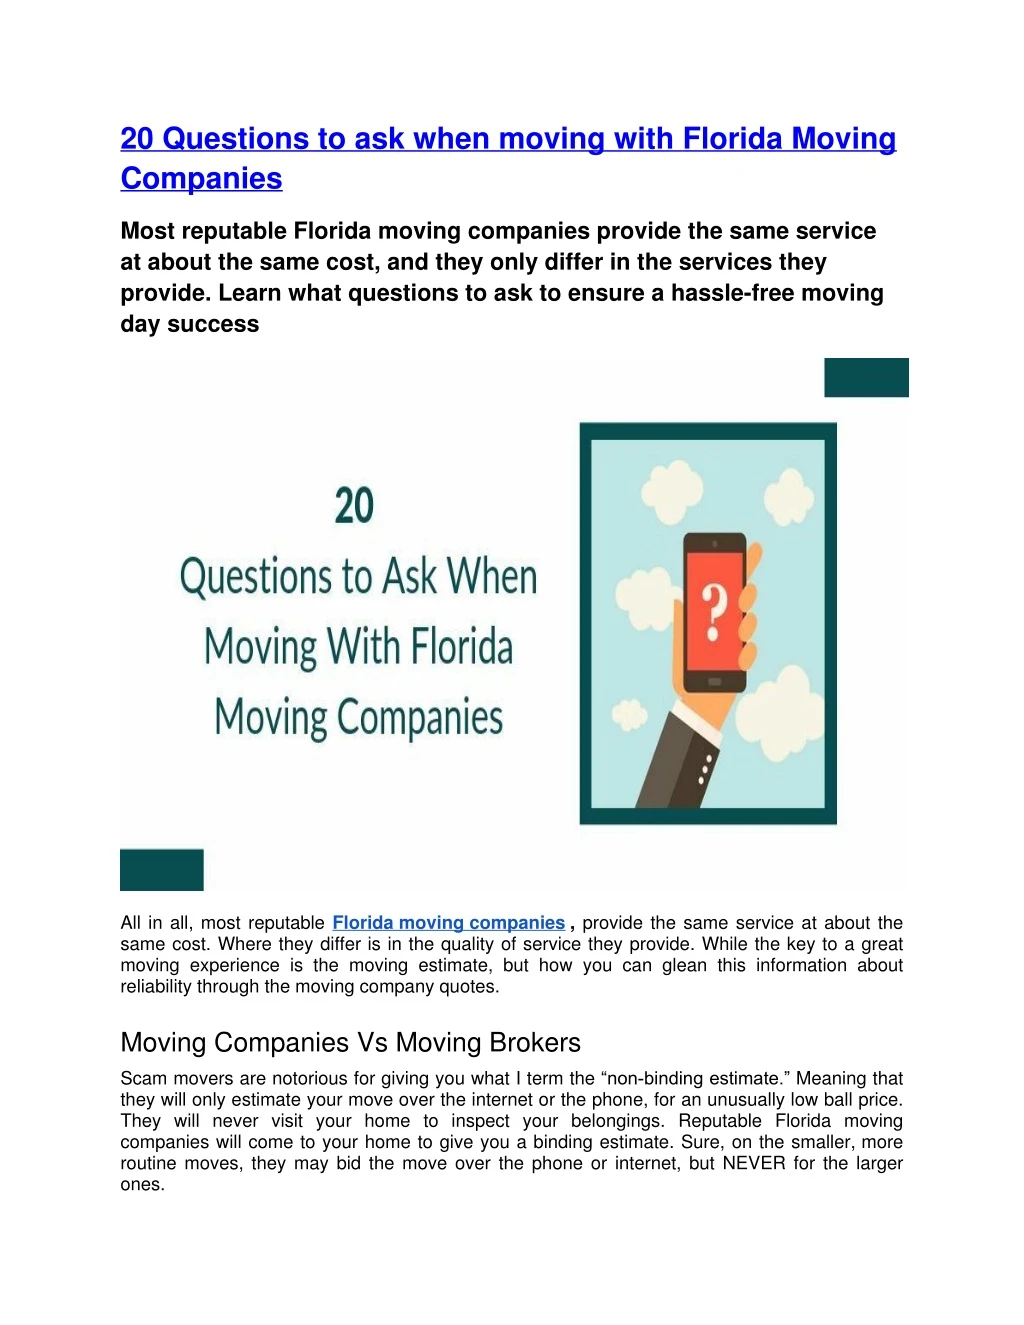 20 questions to ask when moving with florida